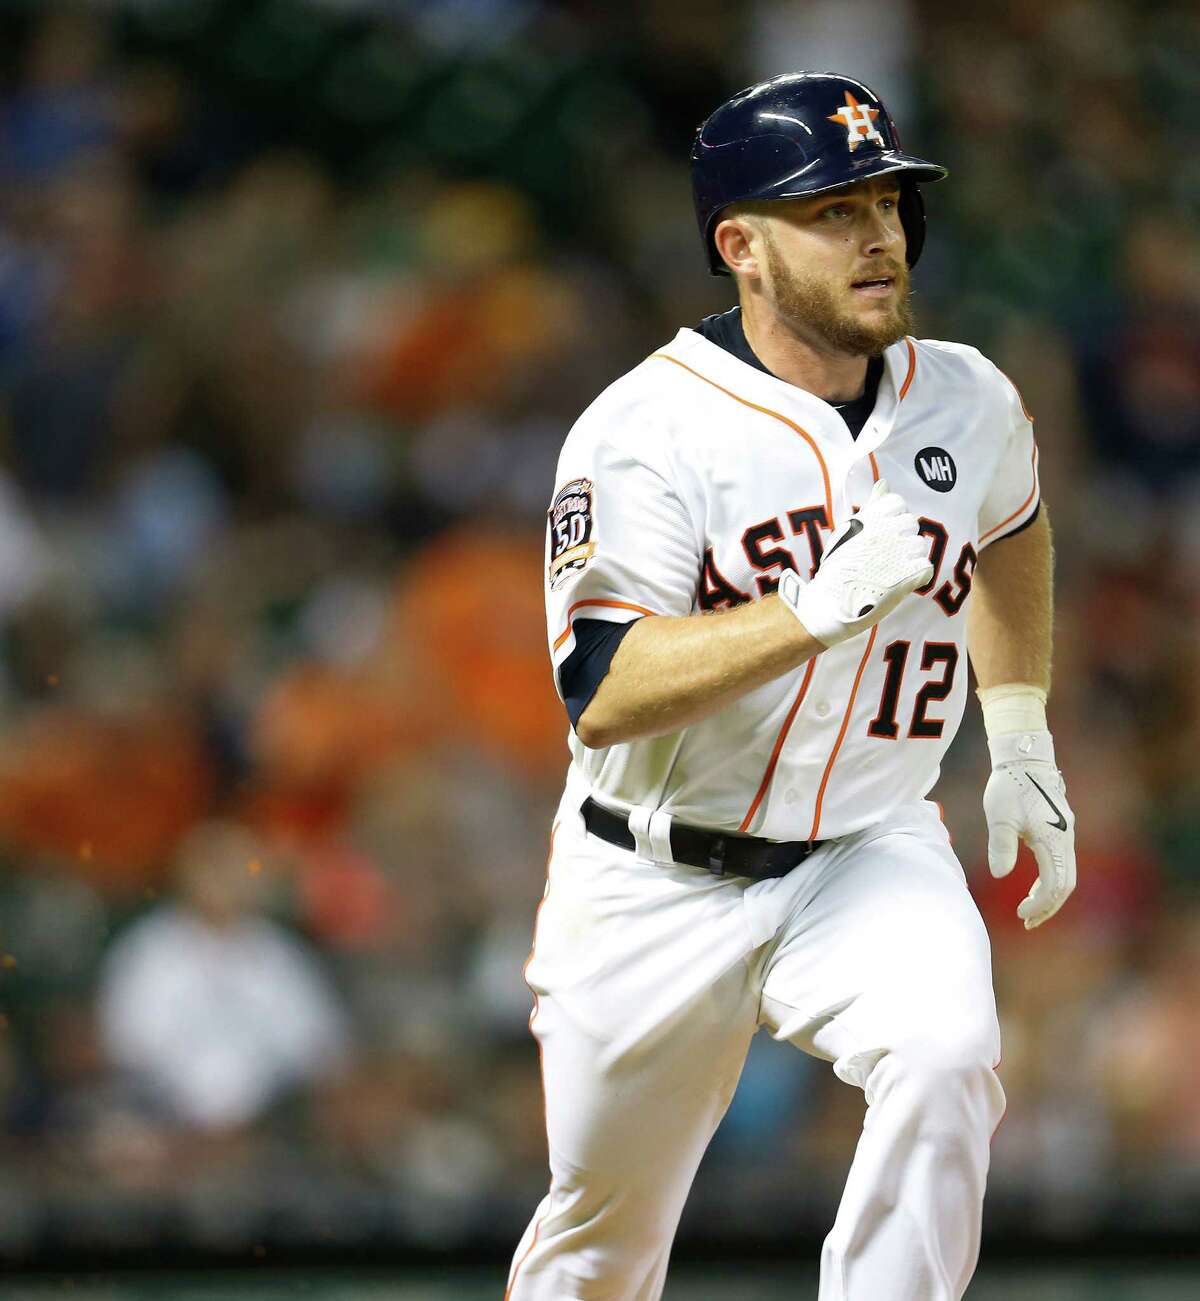 Max Stassi finds consistent stroke for Astros